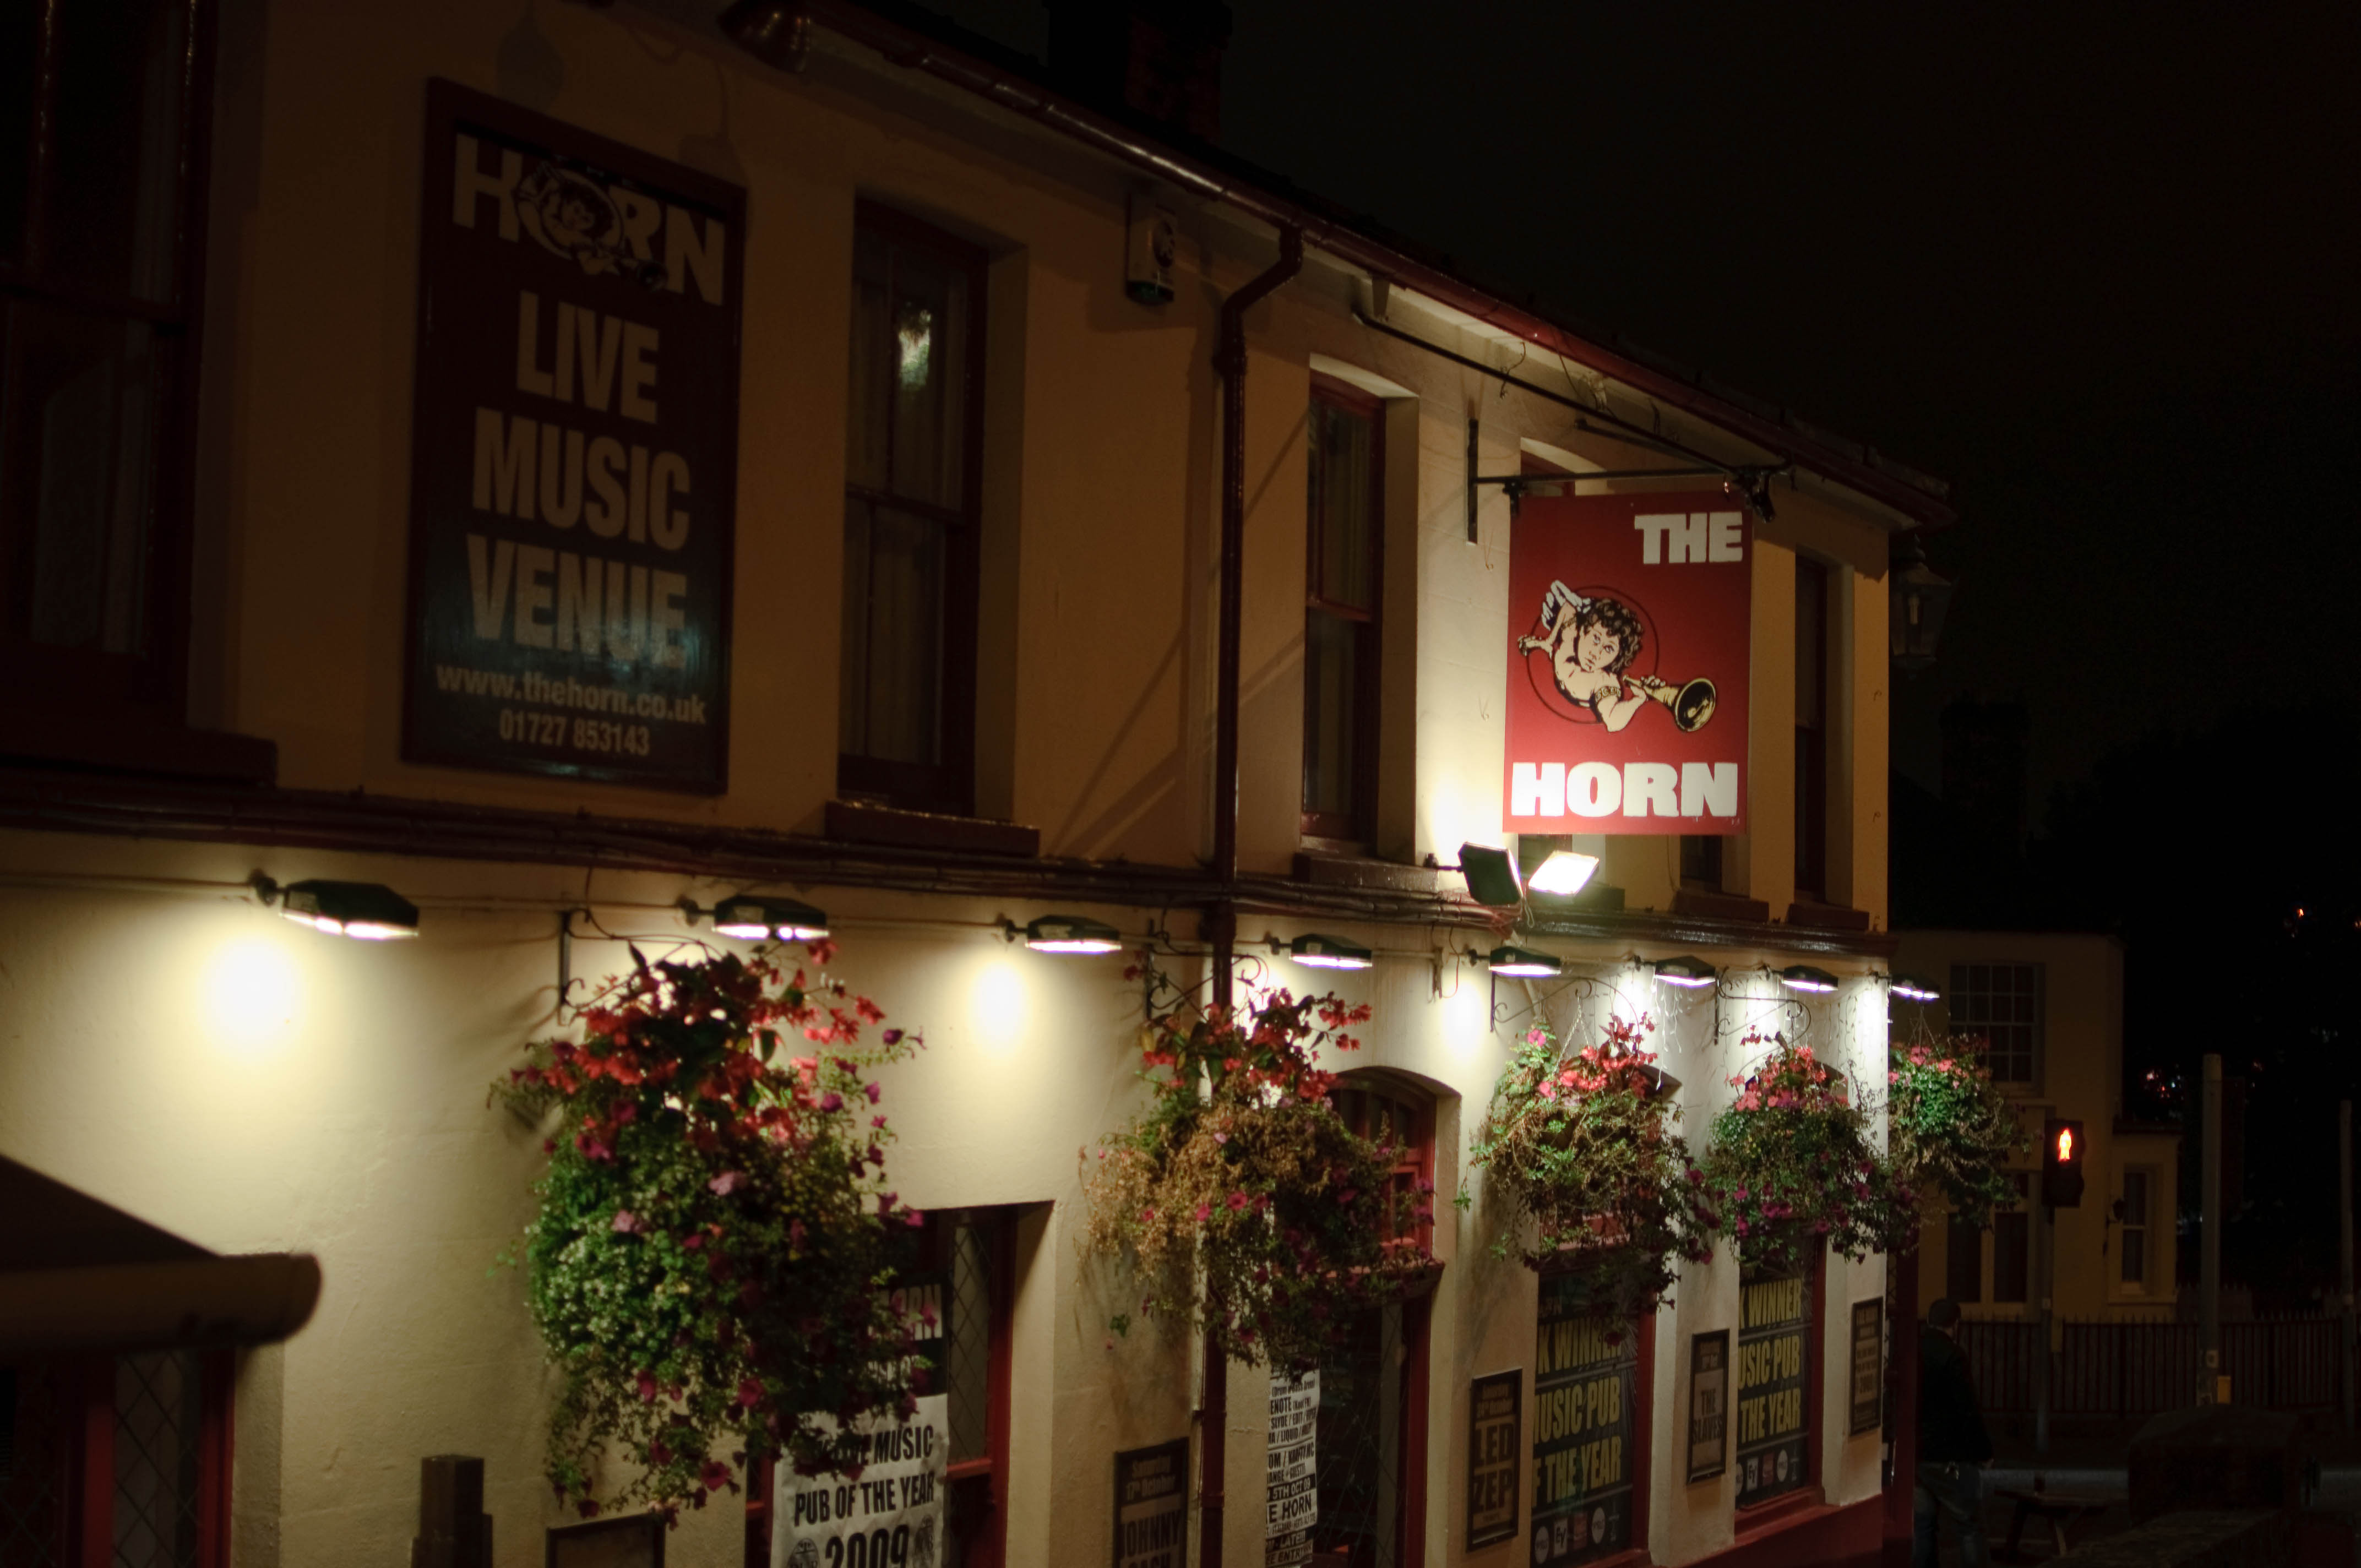 The Horn, pub, in St. Albans